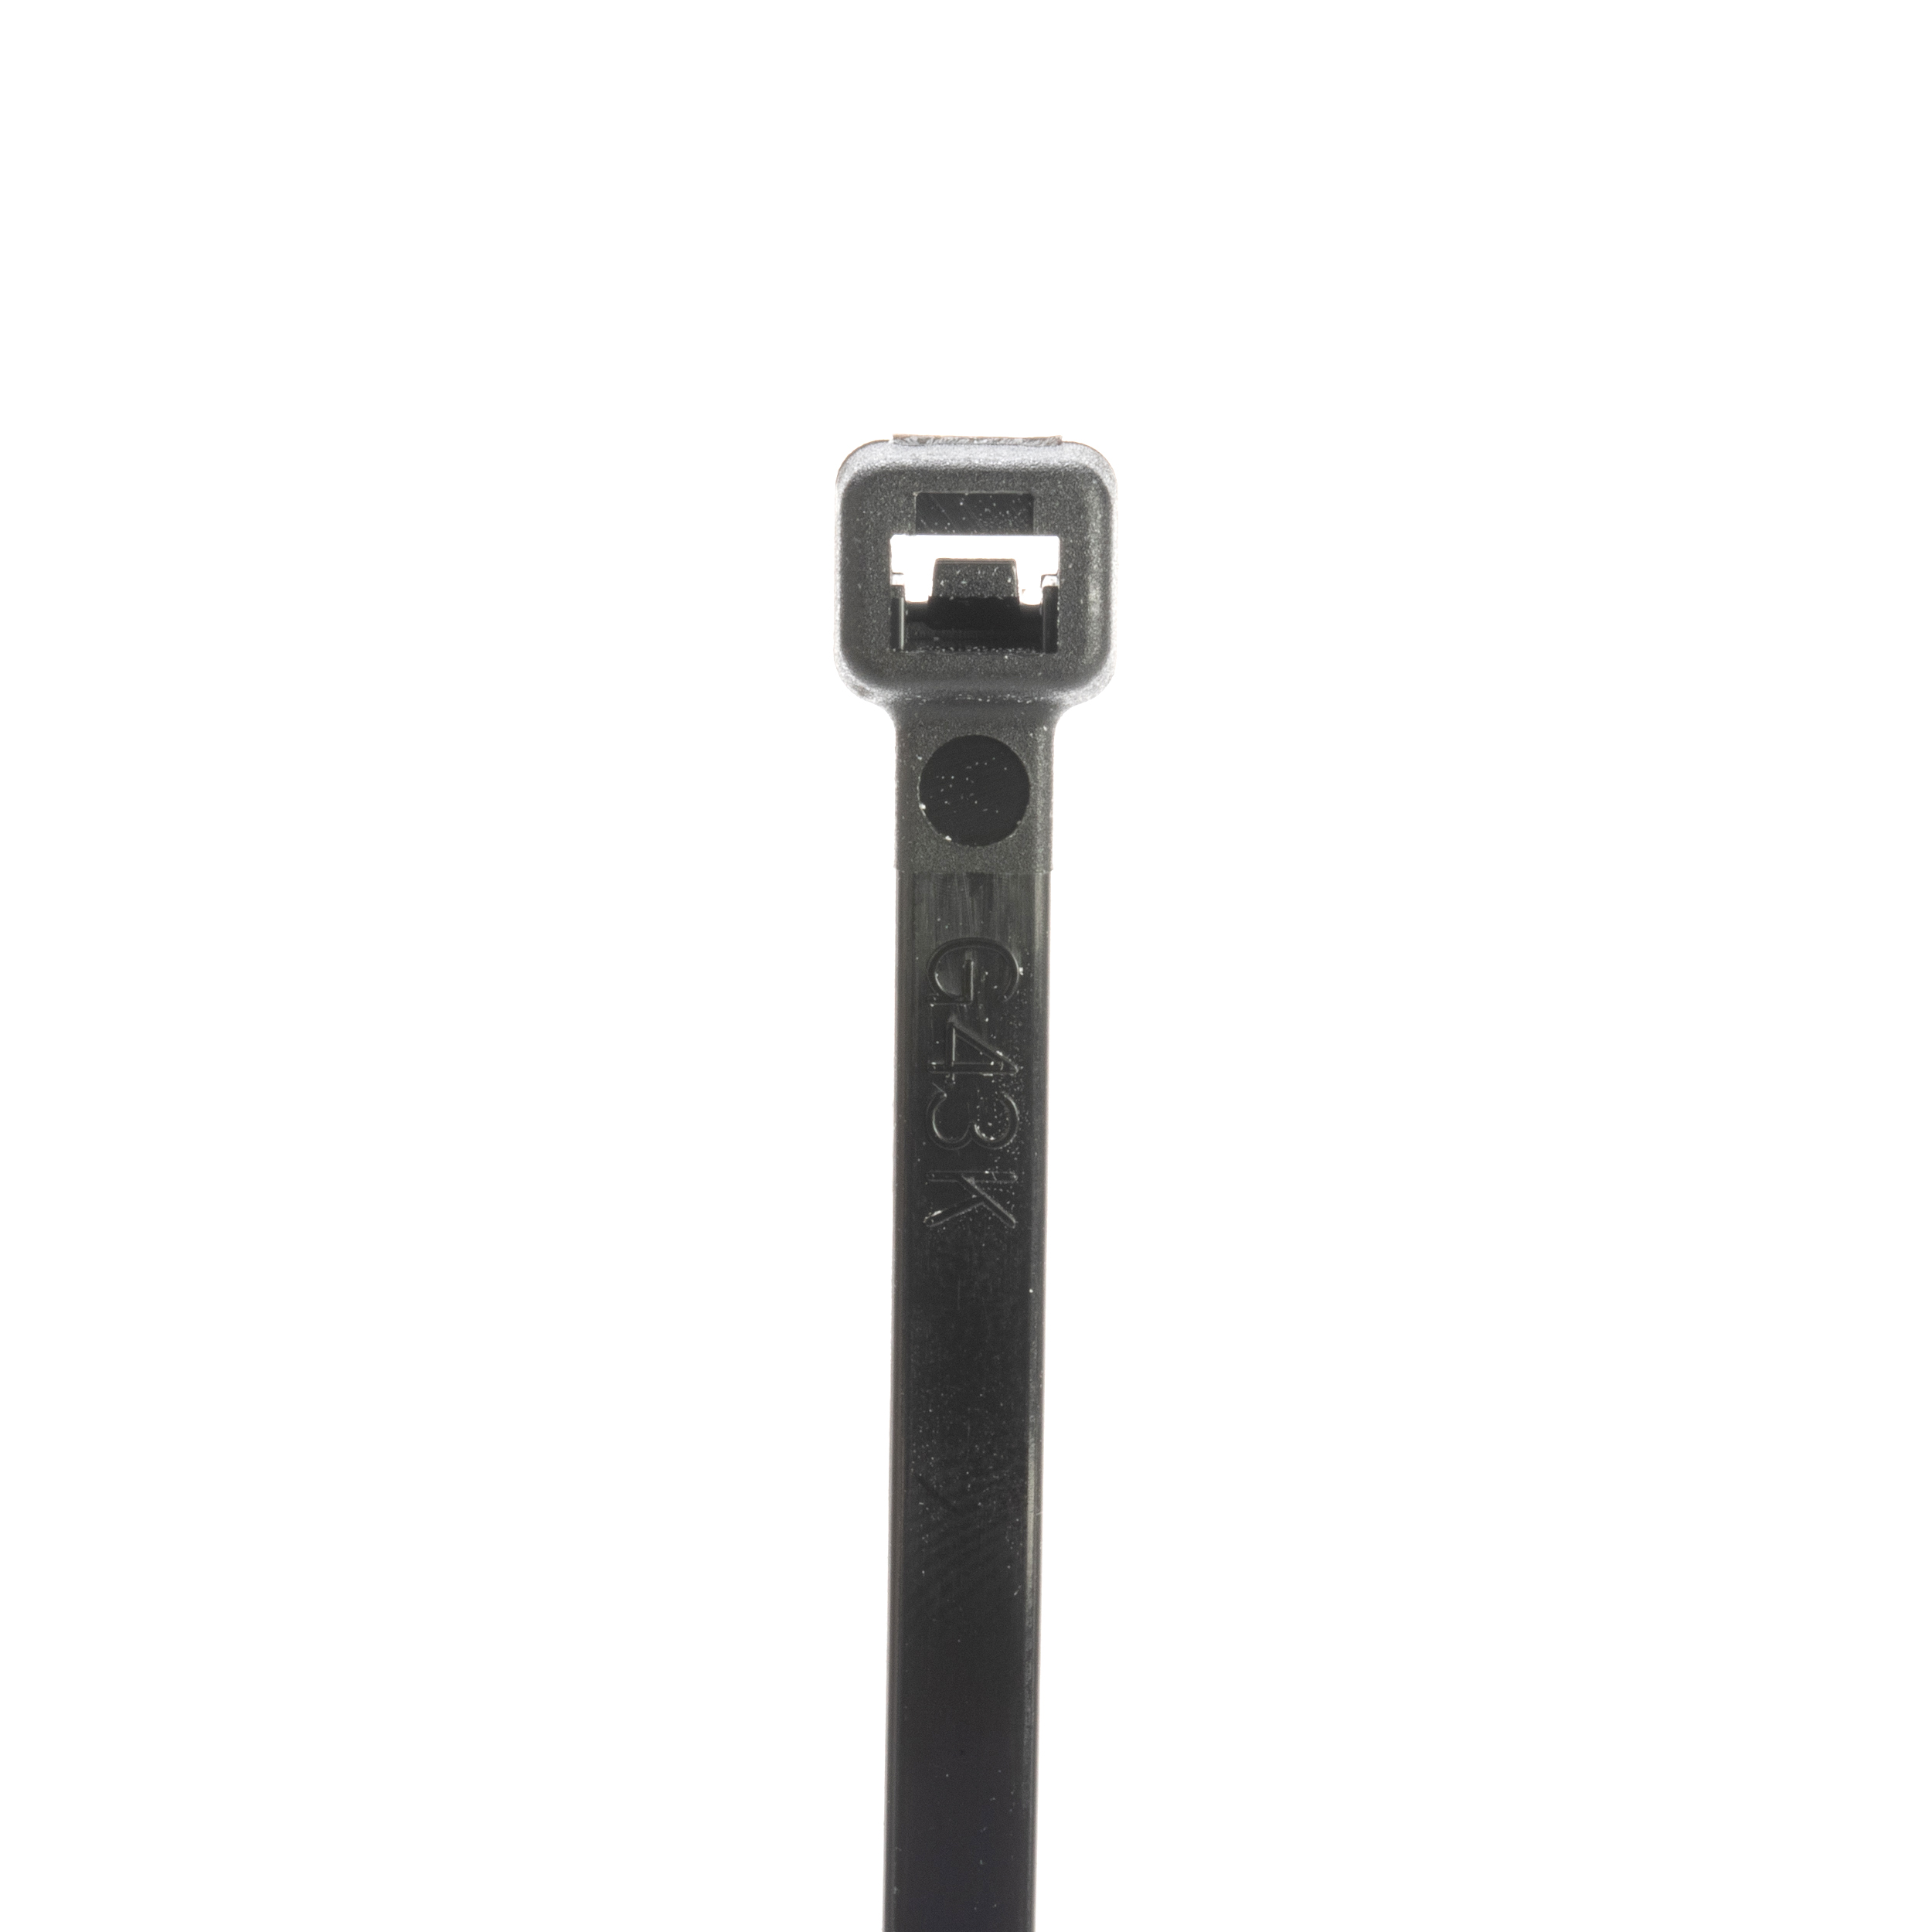 PAN S6-40-C0 5.51" CABLE TIE 40TS BLACK